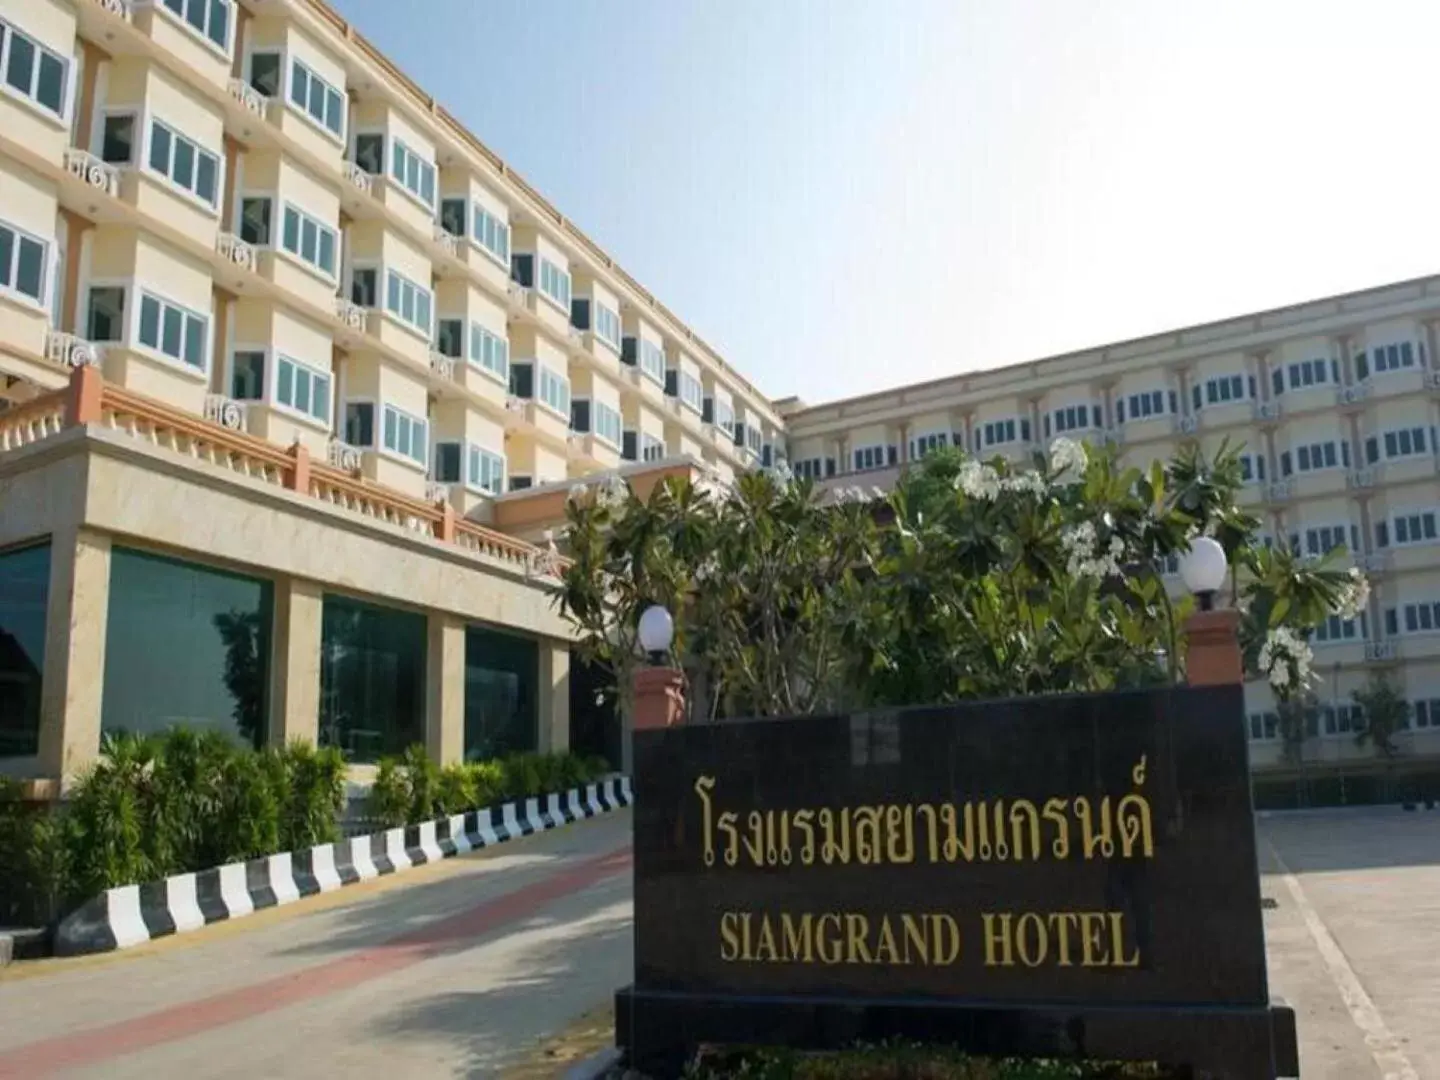 Property Building in Siamgrand Hotel